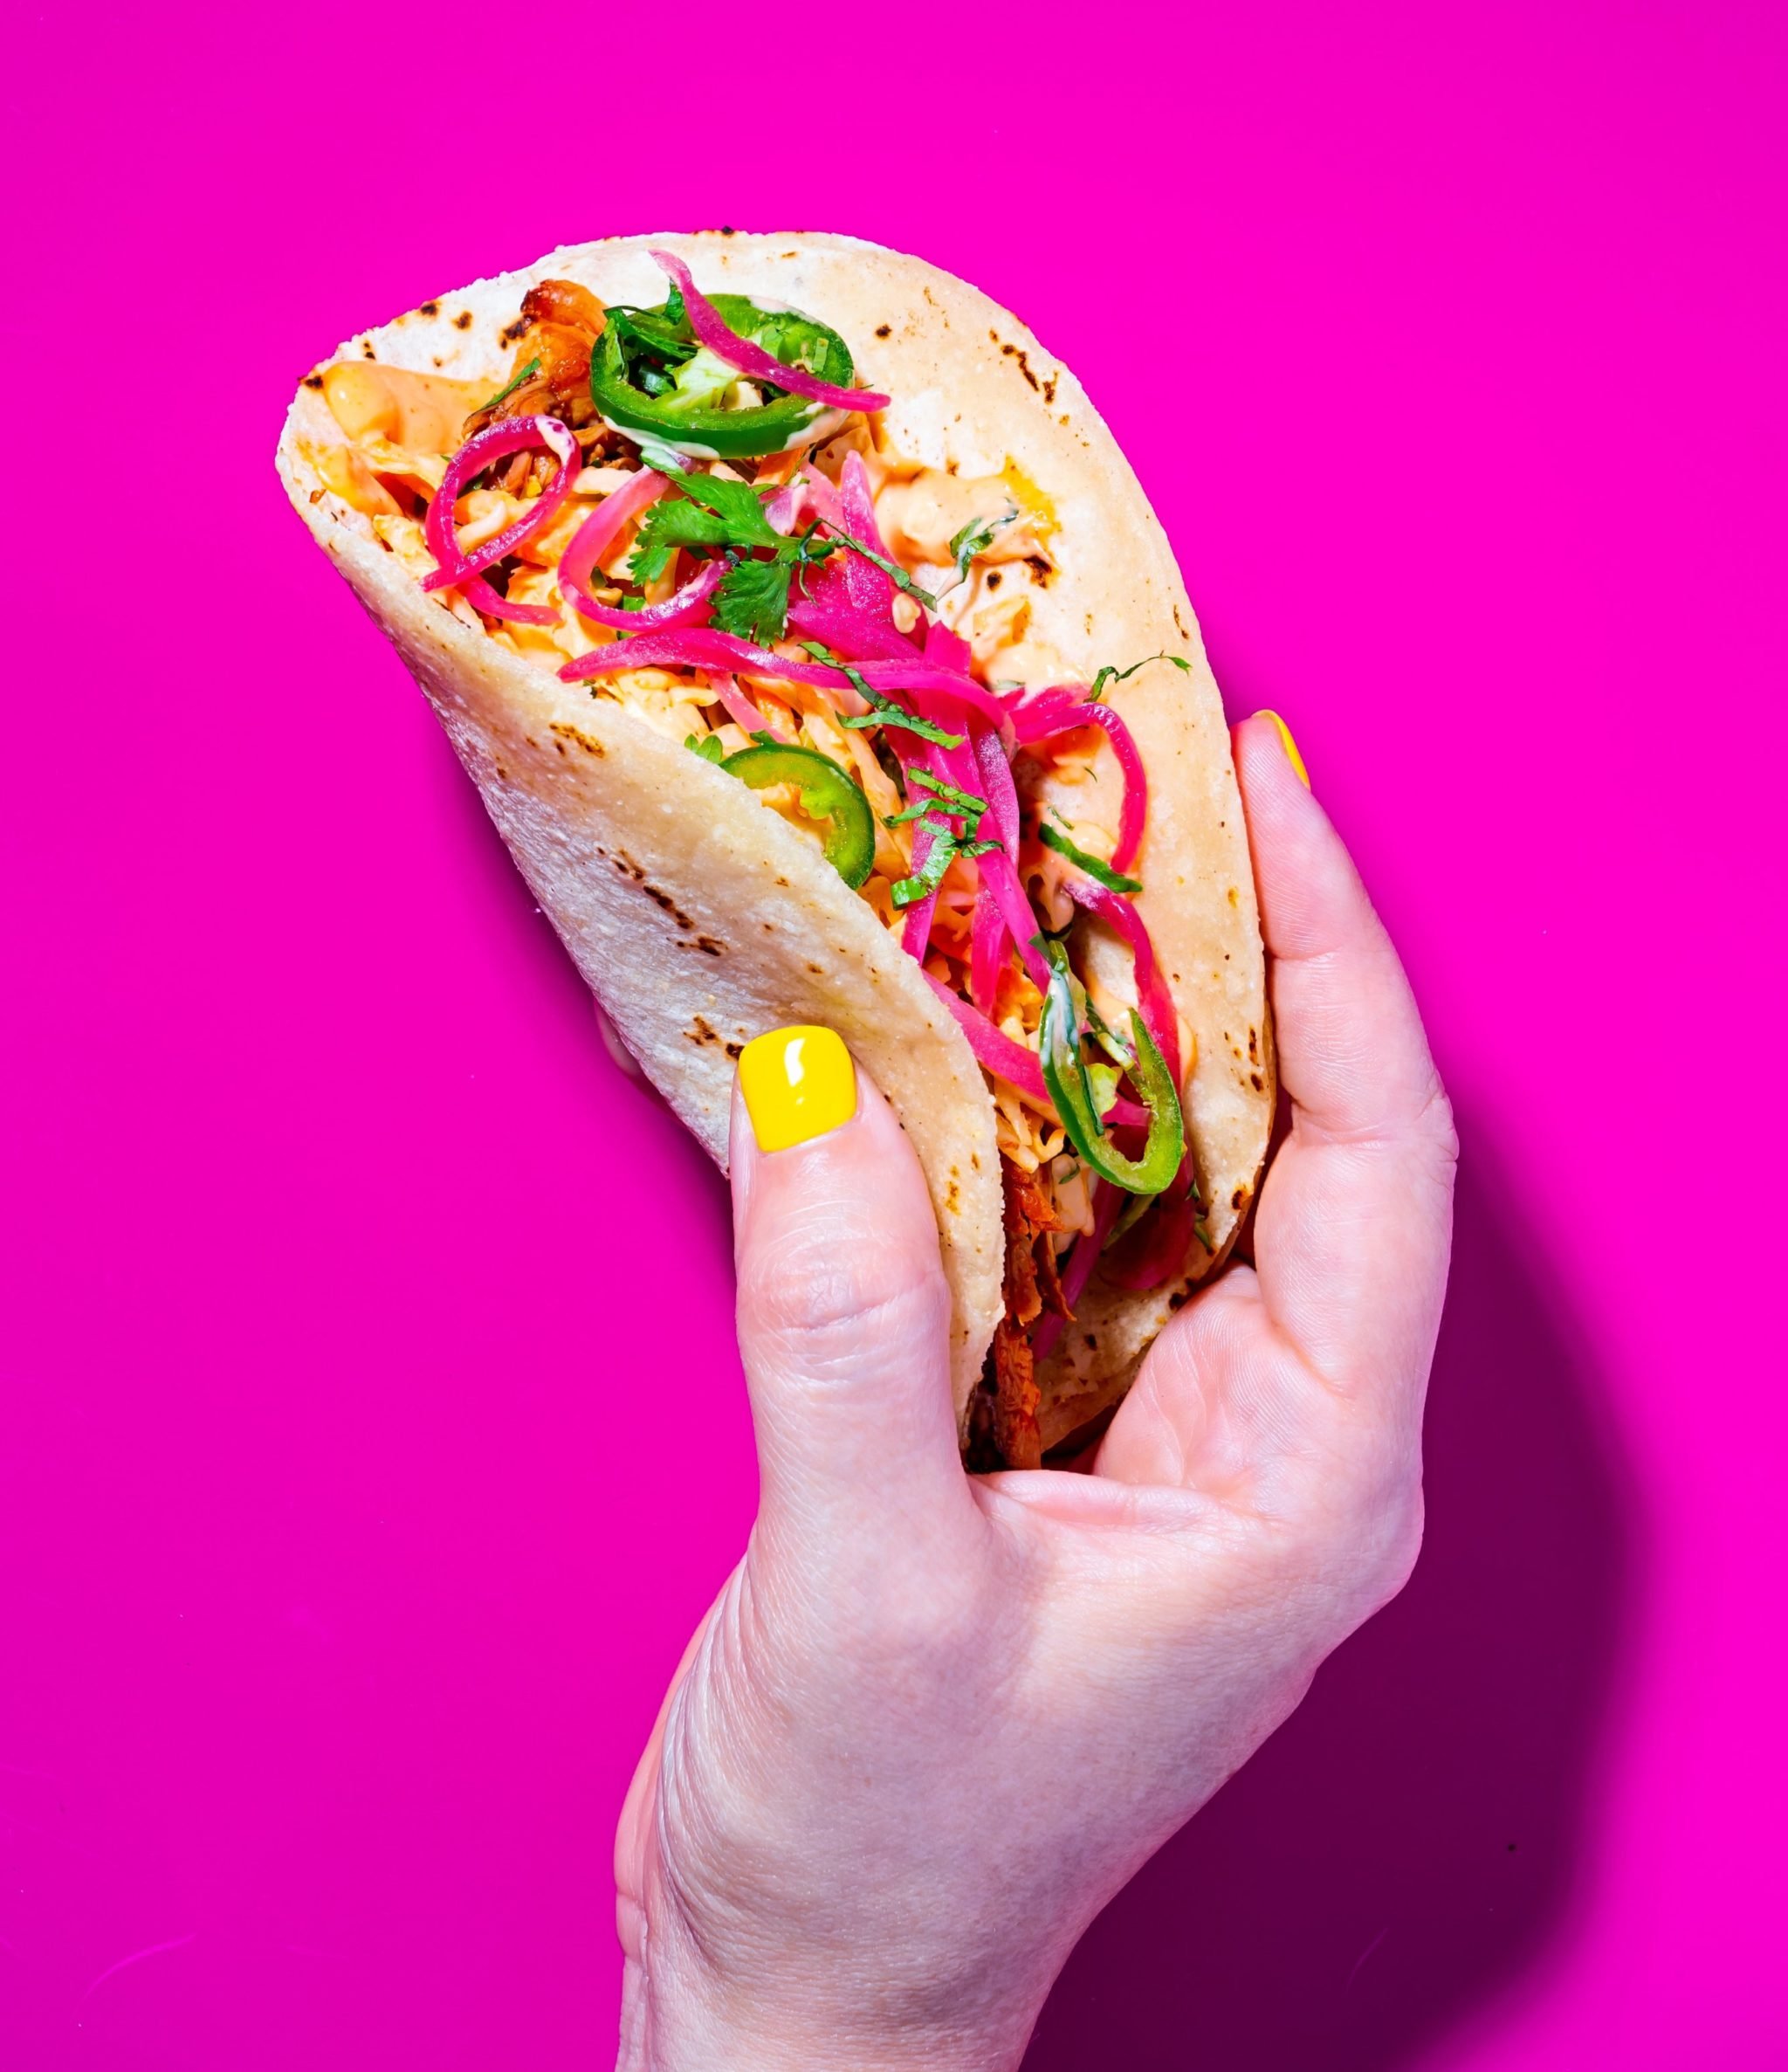 These tacos are the perfect hangover cure